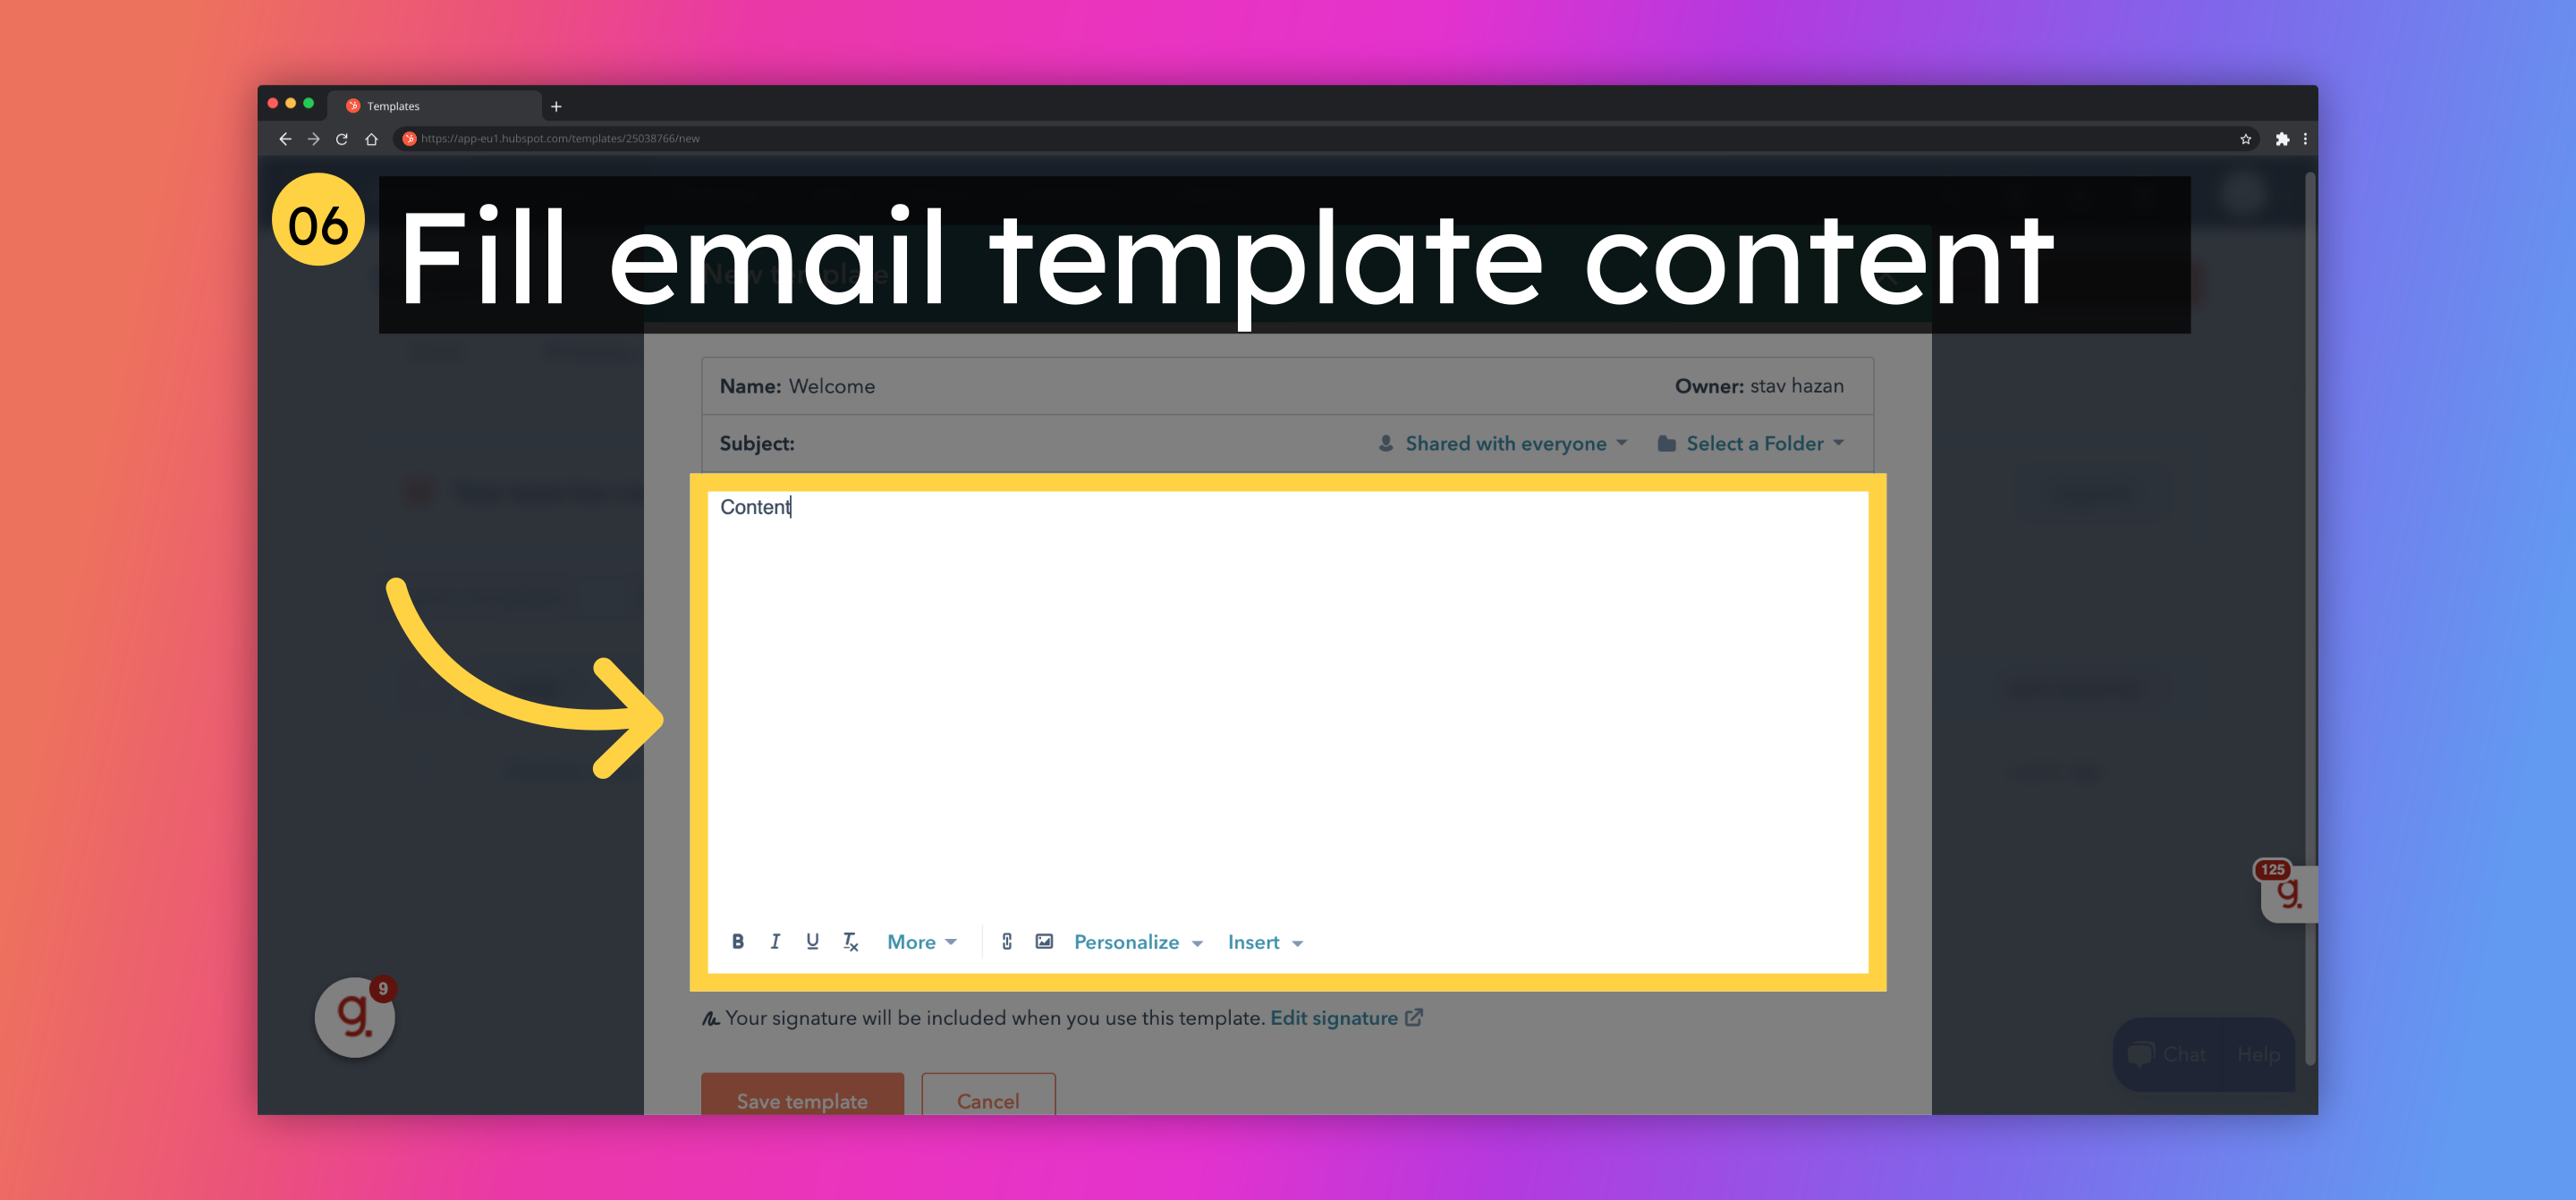 Fill email template content